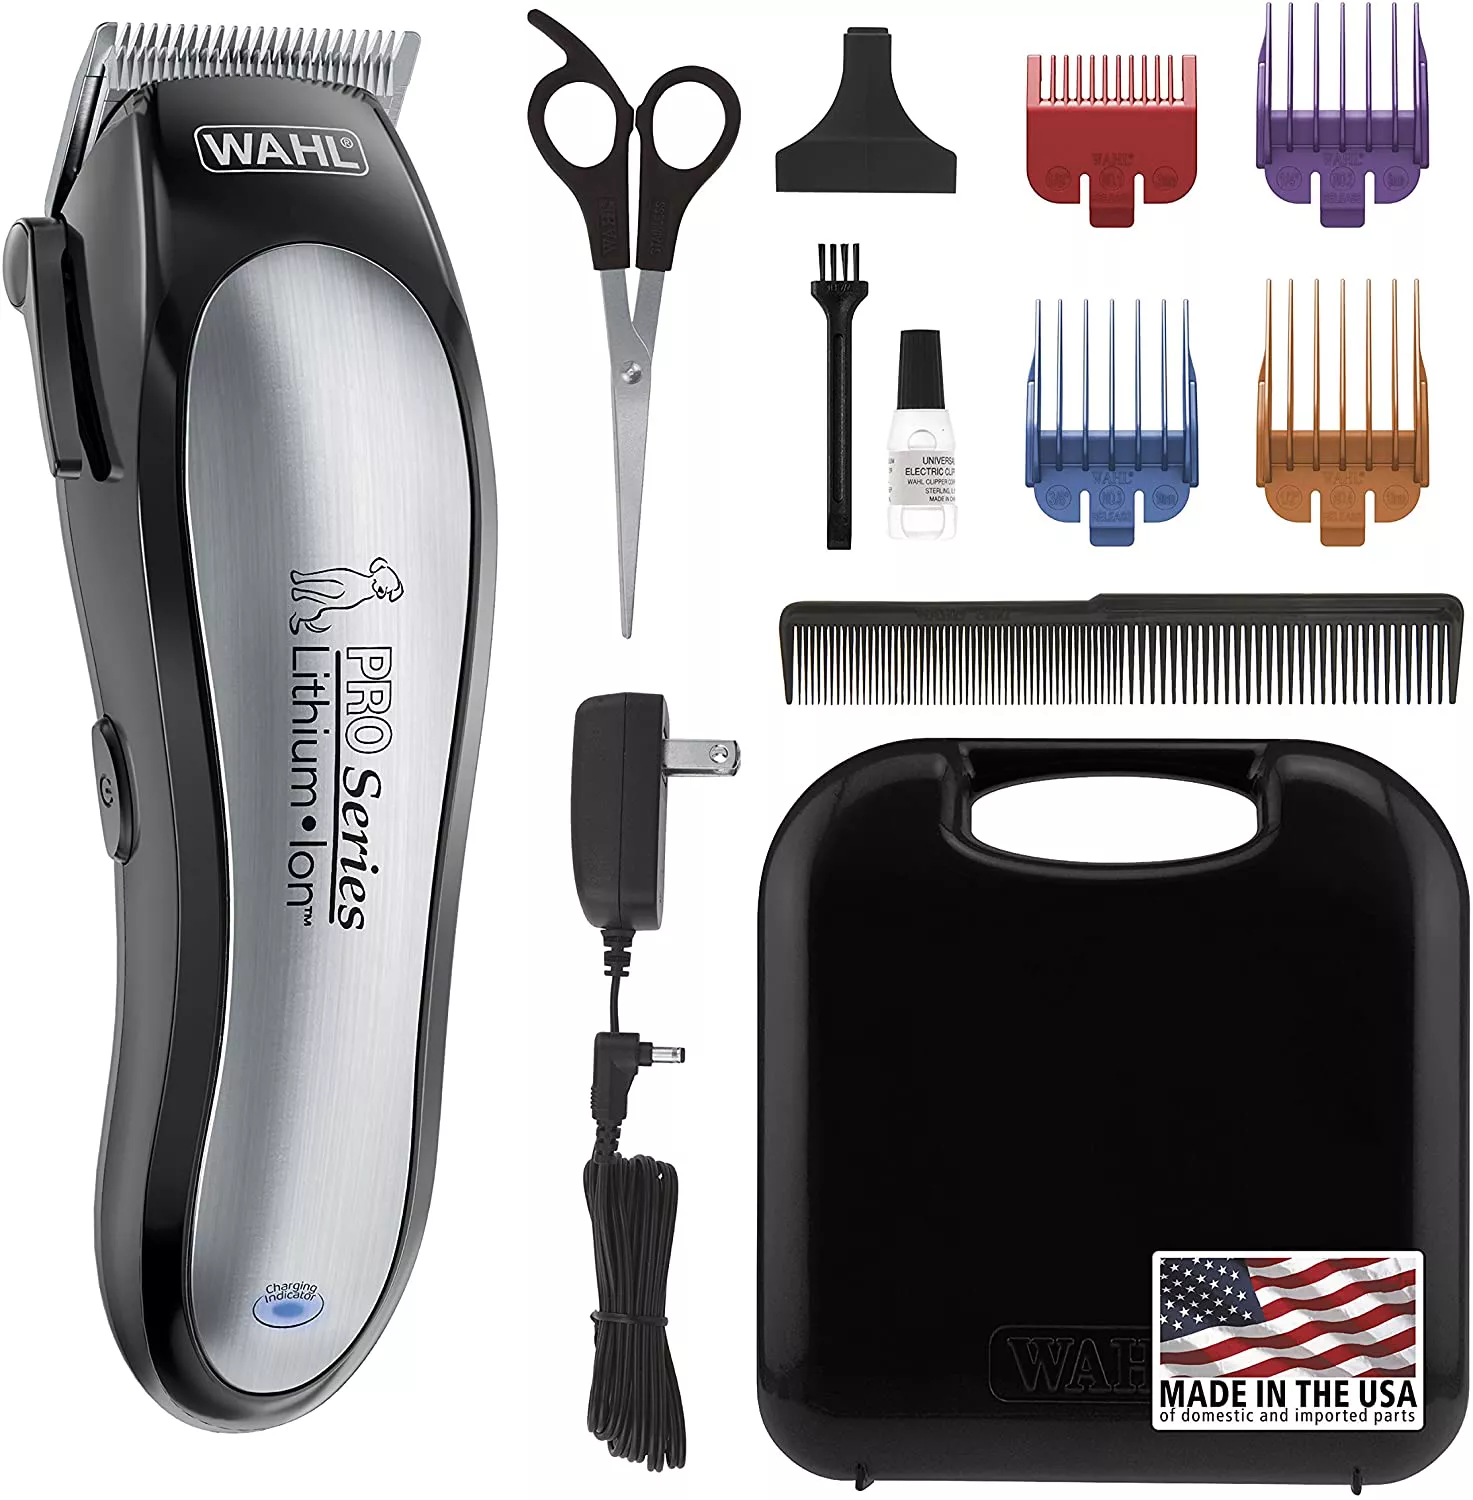 Wahl Pro Series Cordless Animal Clippers